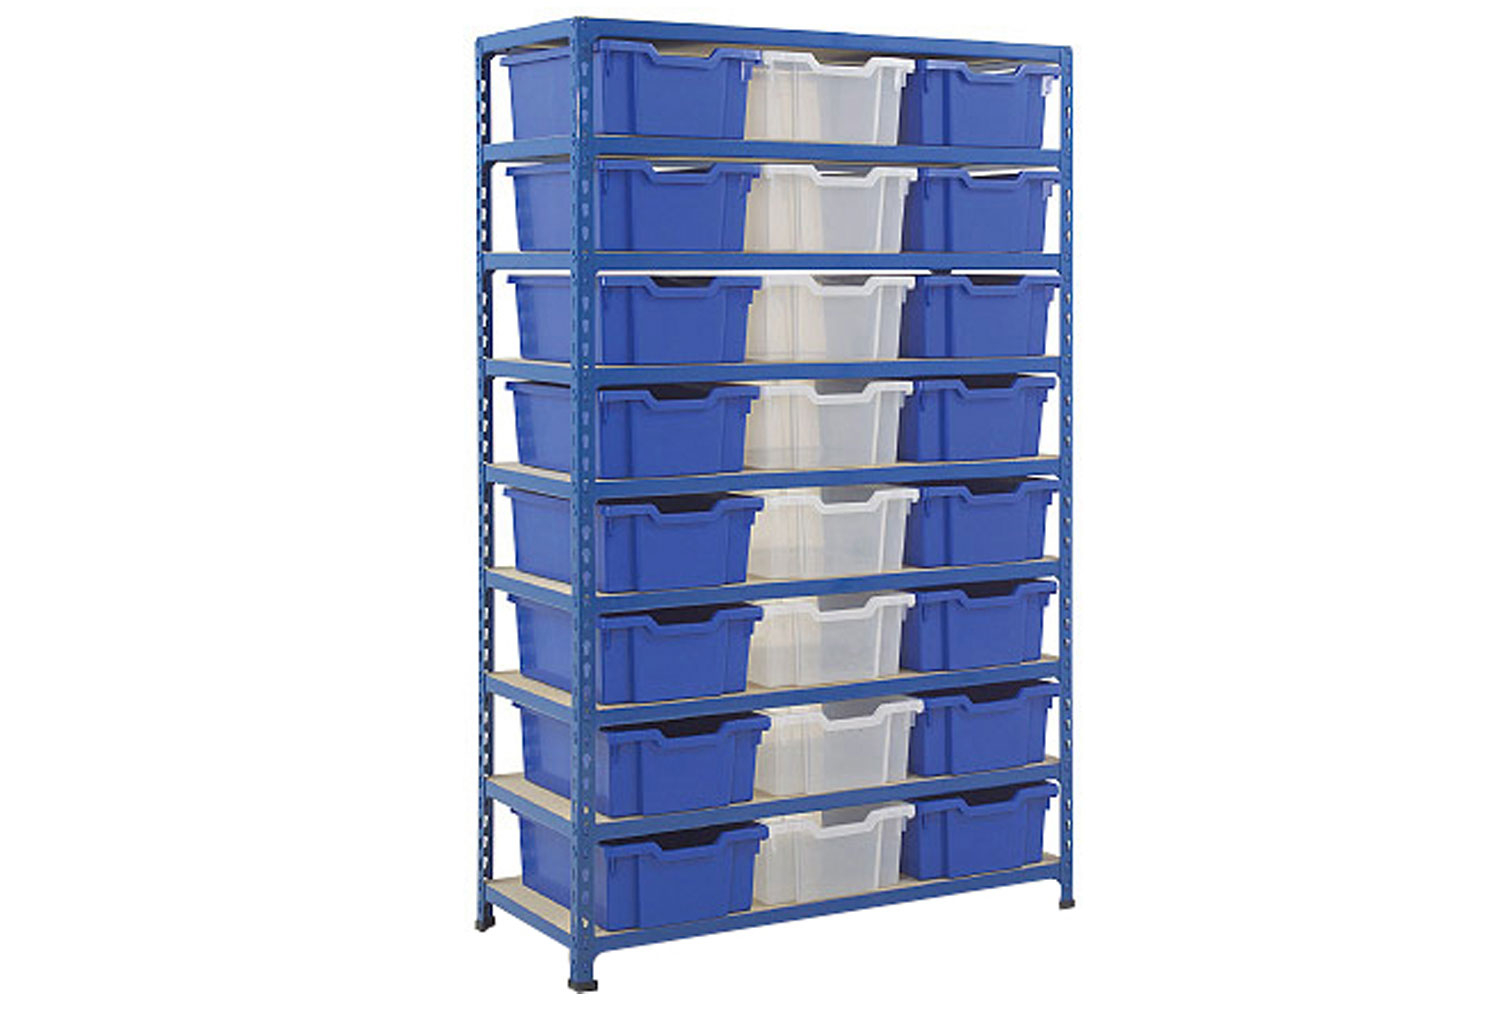 Rapid 2 Shelving Bay With 24 Deep Gratnells Trays, Blue Trays, Blue, Express Delivery